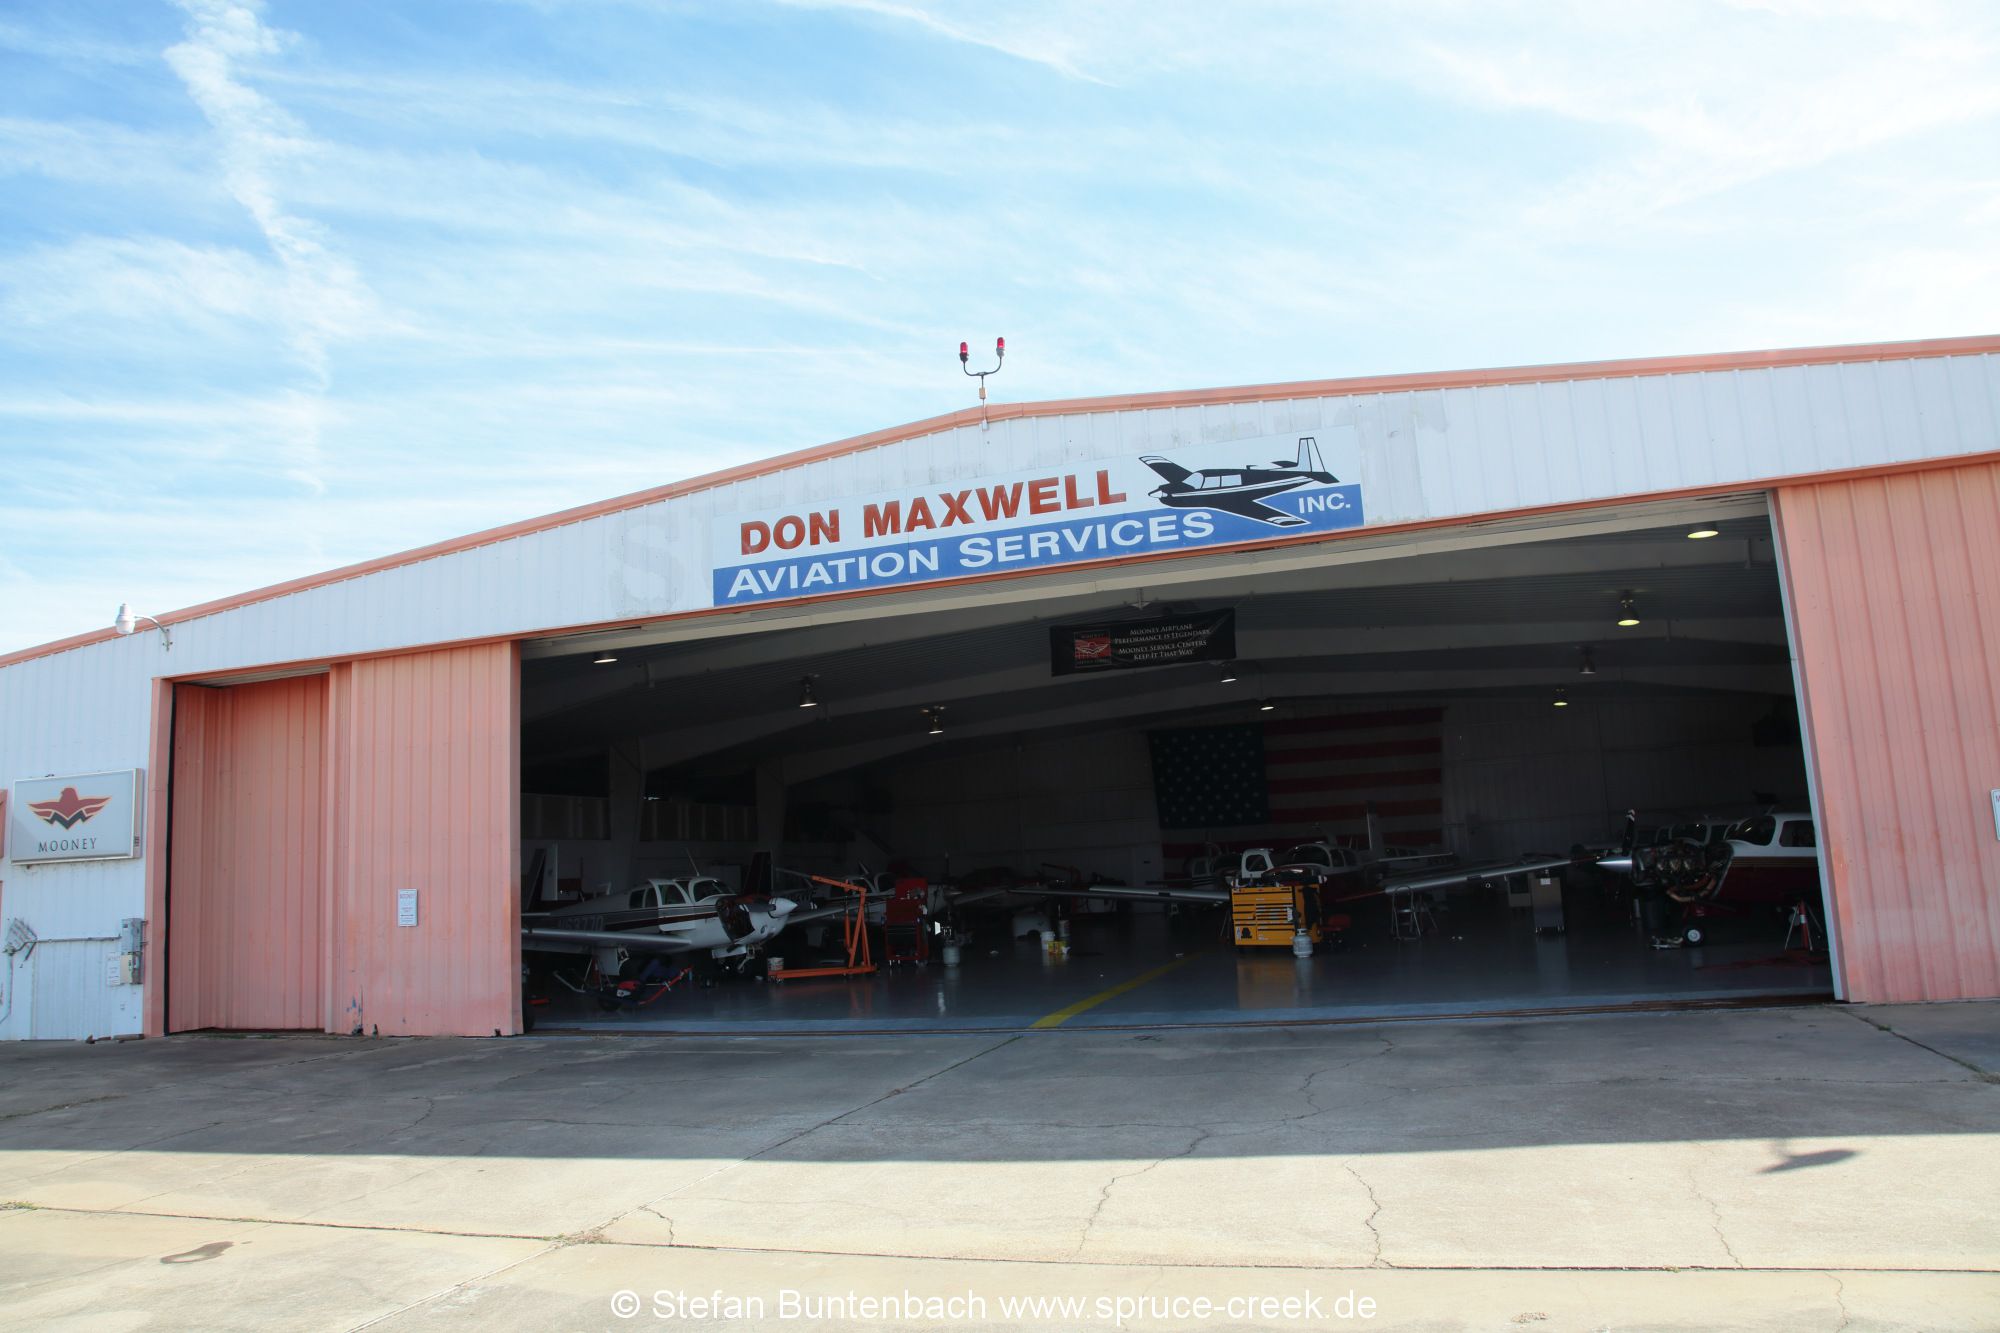 Hangar of Mooney Service Center Don Maxwell Aviation Services in Longview in Texas. --- Mooney M20F IMG_1046Mooney M20F IMG_1046